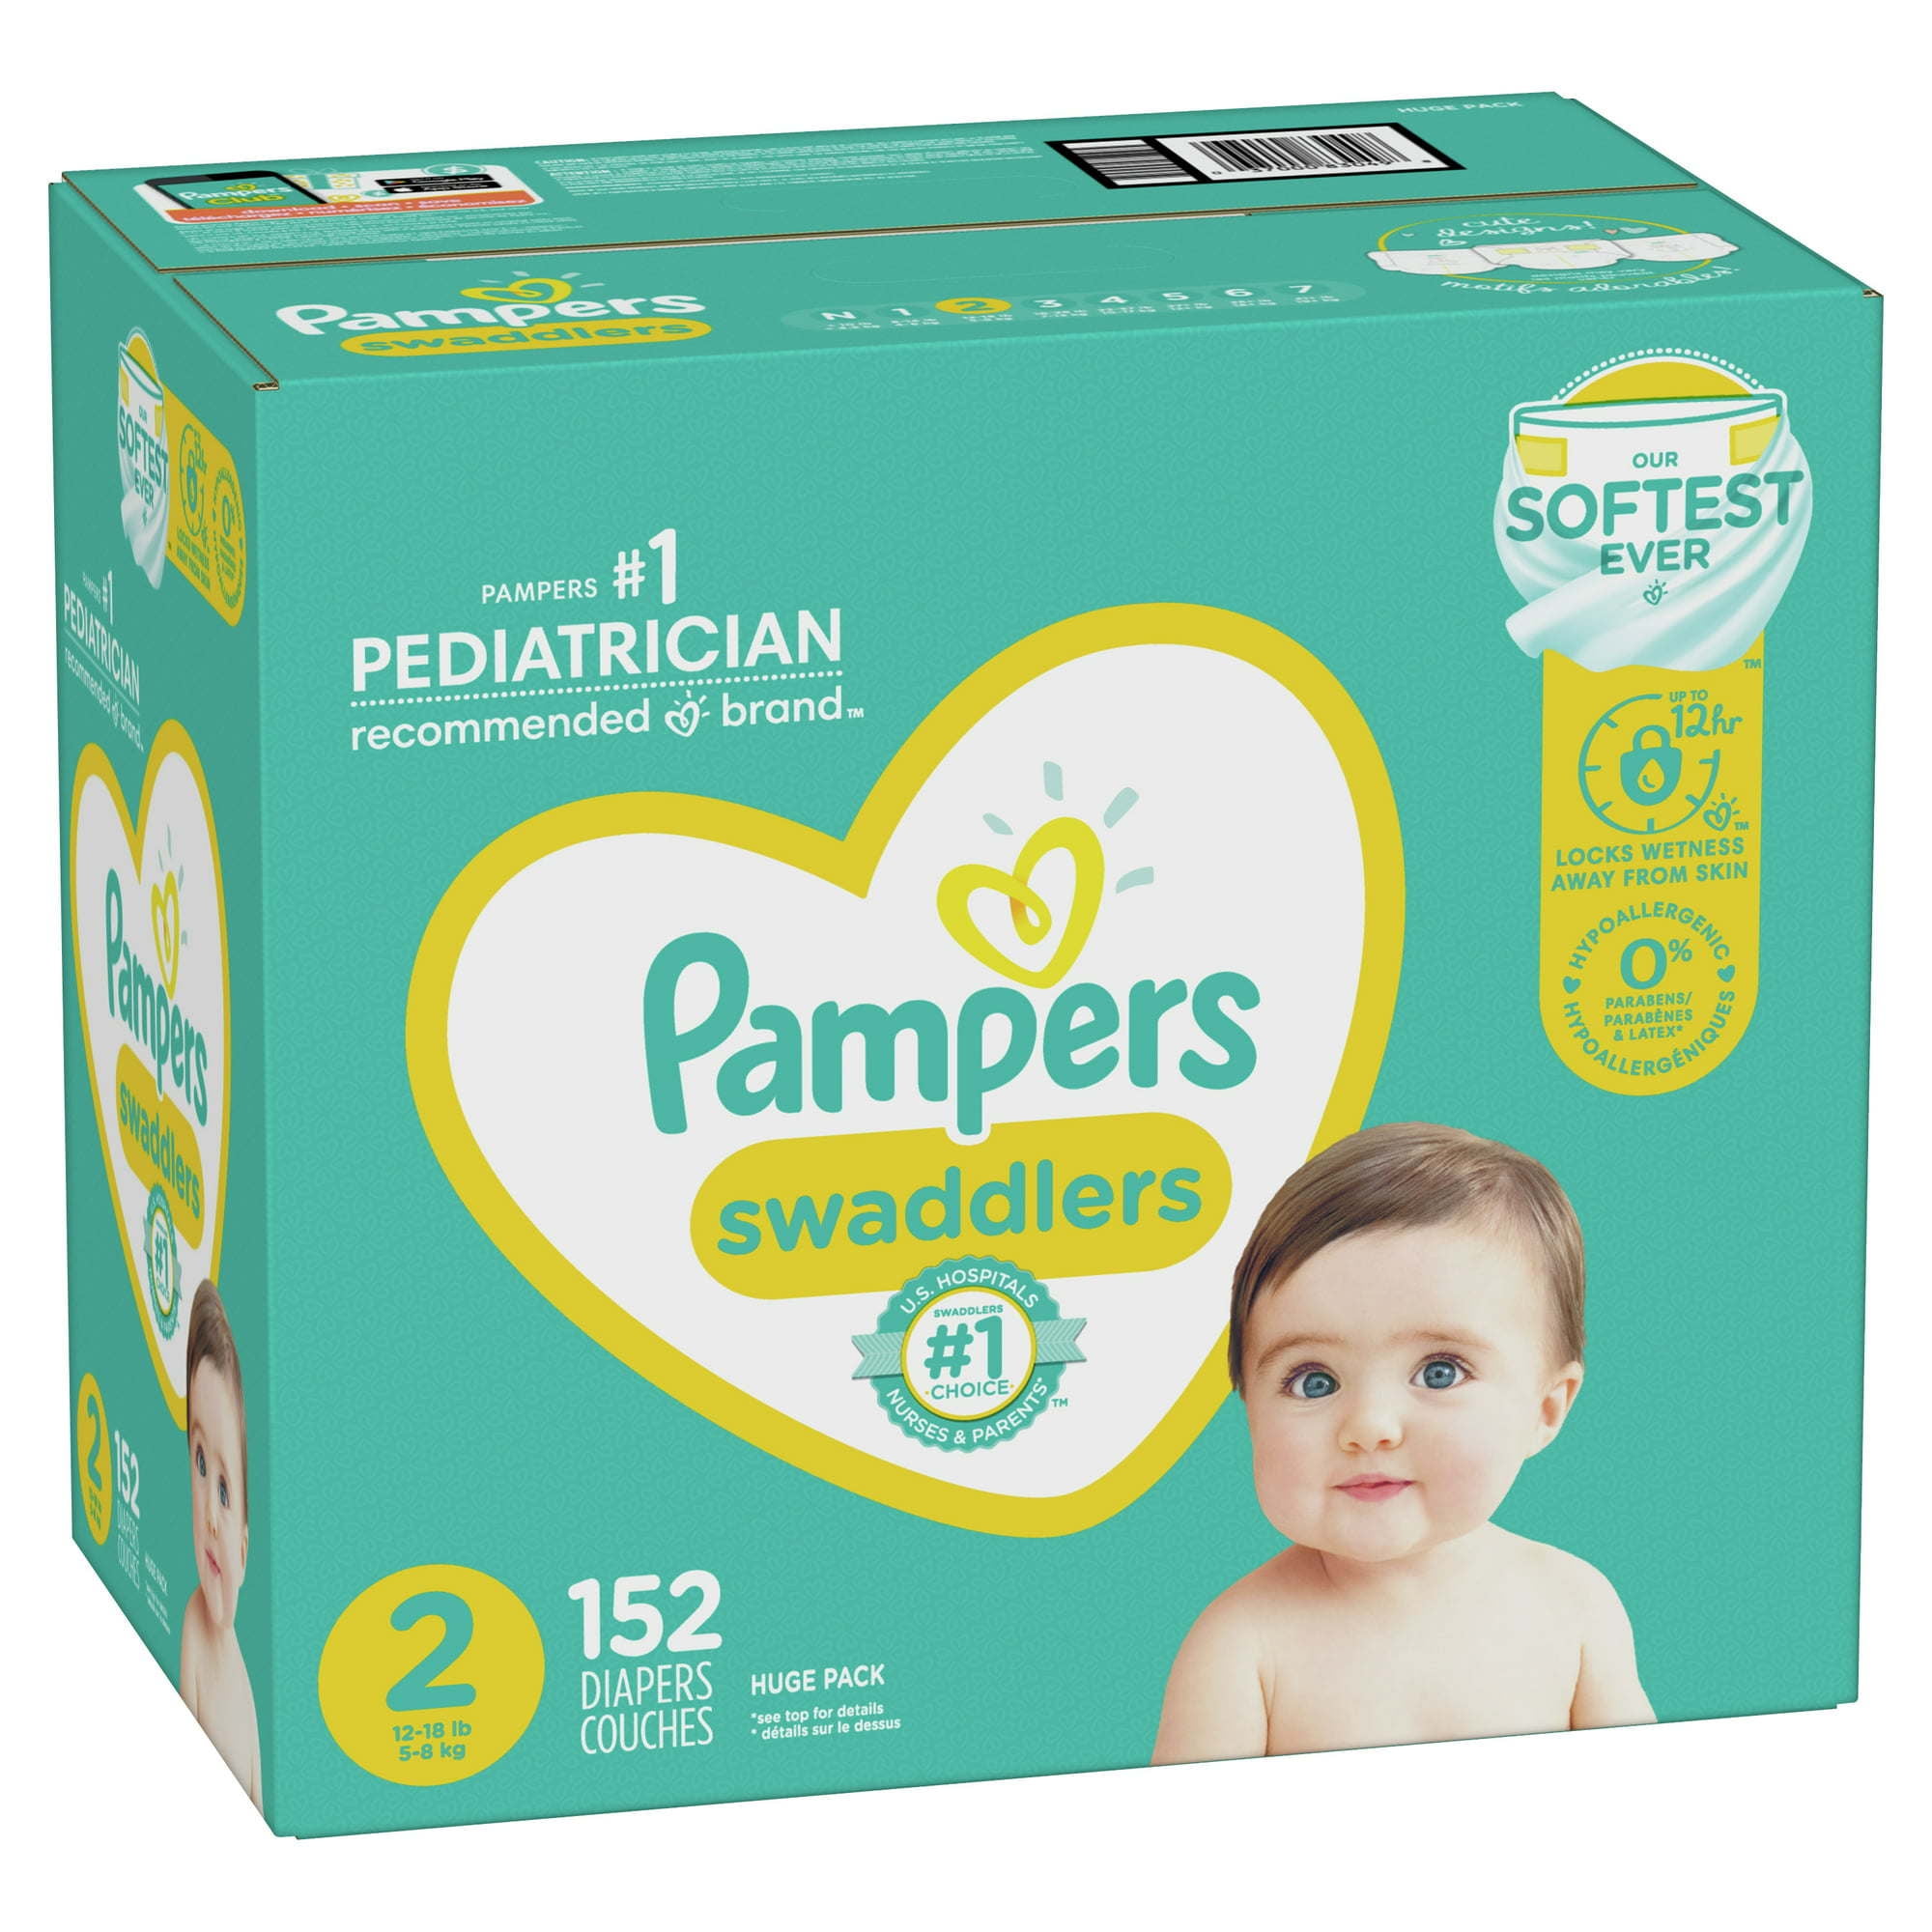 Pampers Pañales Swaddlers, talla N, 32 unidades